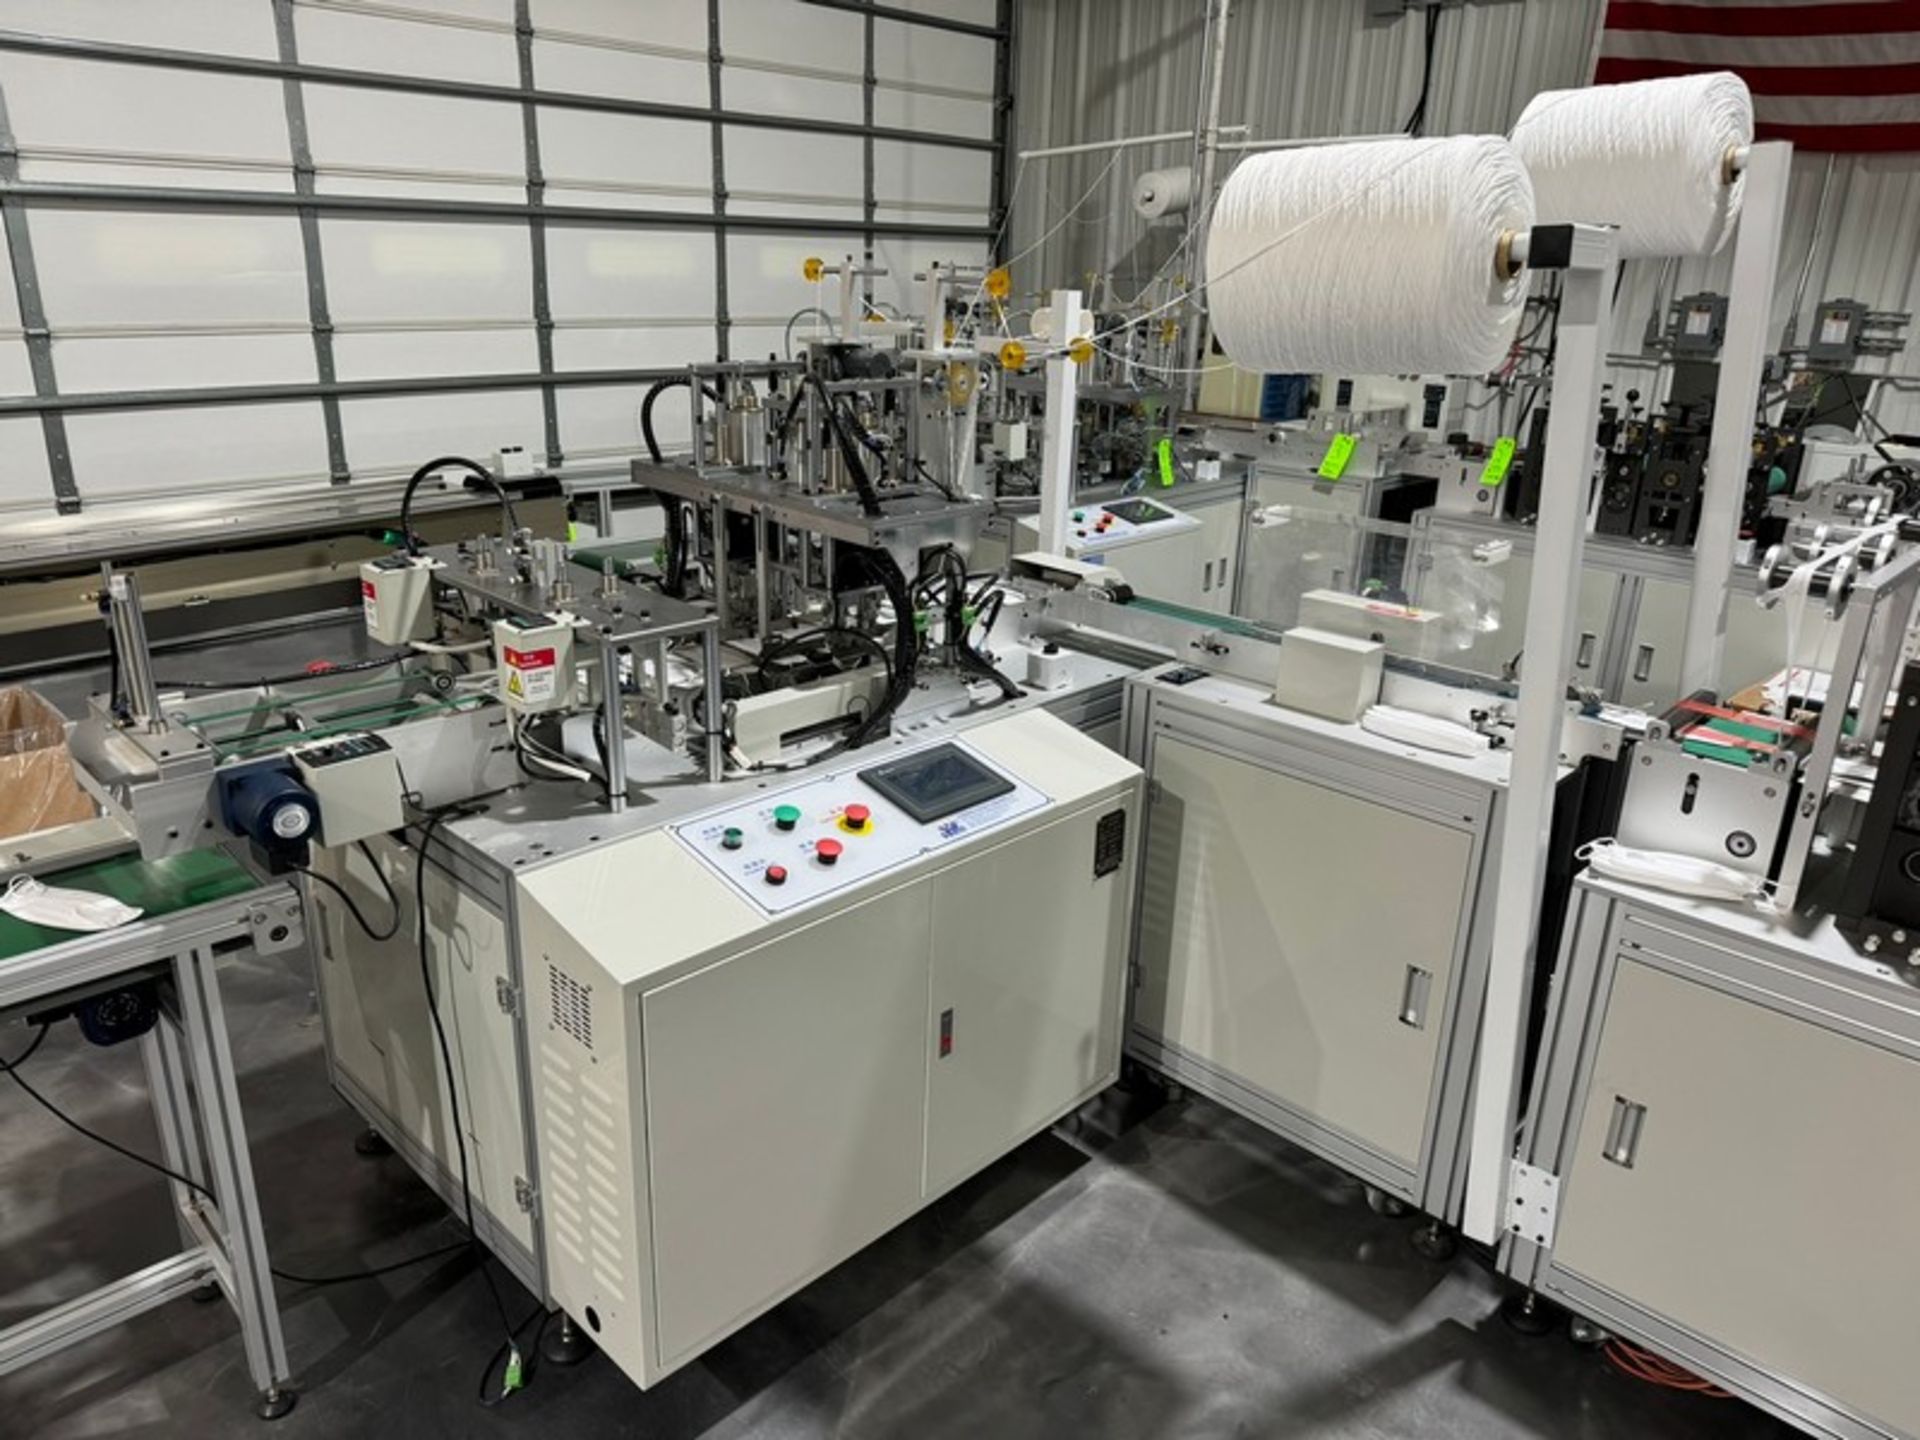 2022 KYD Automatic 6,000 Units Per Hour Mask Manufacturing Line, Includes Unwinding Station, Rolling - Bild 5 aus 30